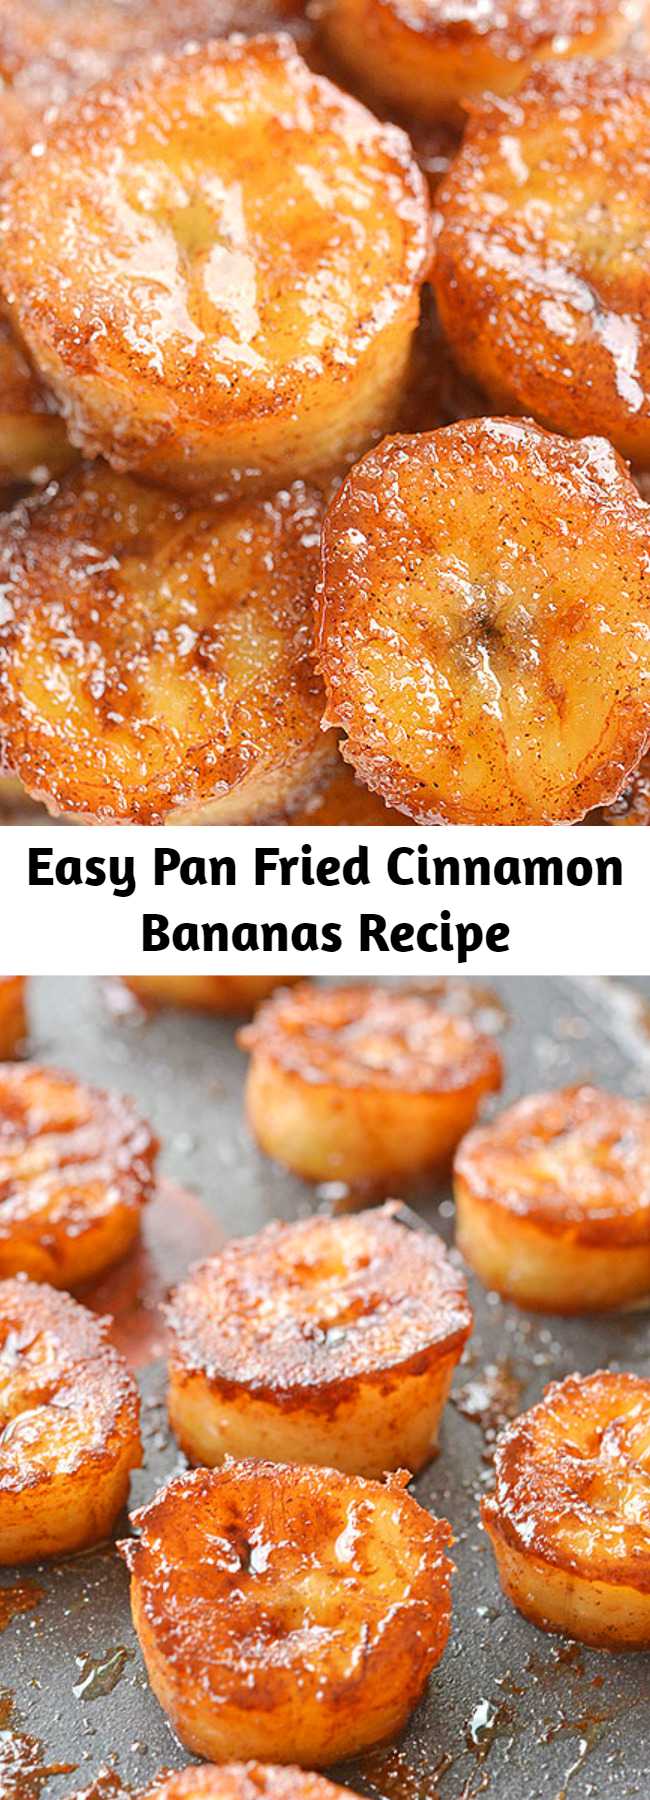 Easy Pan Fried Cinnamon Bananas Recipe - These pan fried cinnamon bananas are so easy to make and taste SO GOOD! They're amazing (seriously AMAZING) on ice cream or pancakes, or just as a snack. Soft and sweet on the inside and caramelized on the outside.